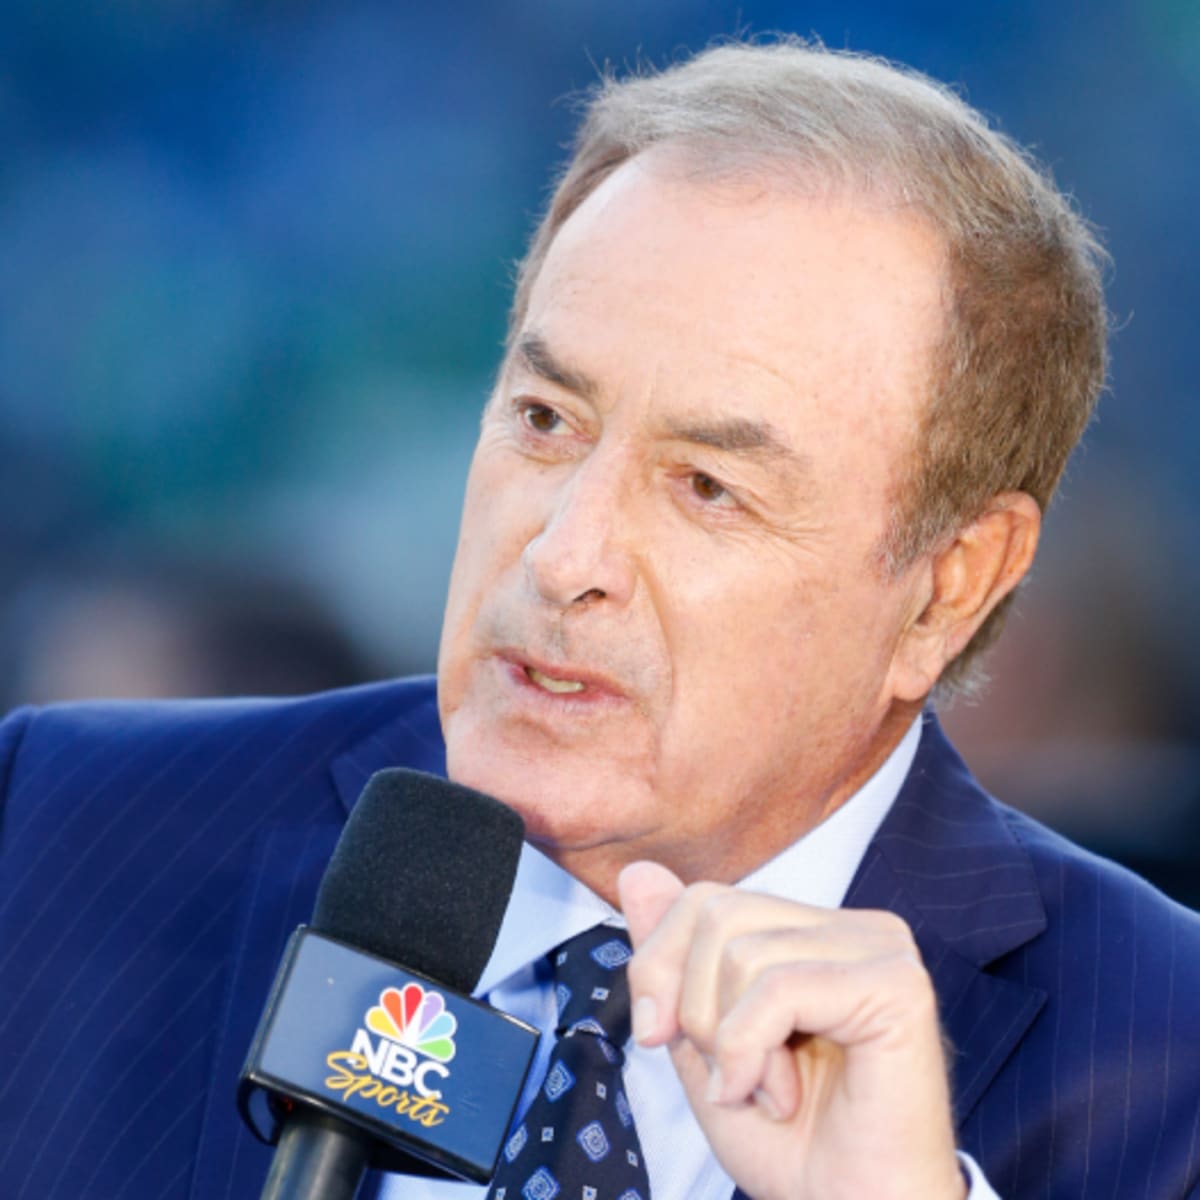 Al Michaels Shares Brutally Honest Thoughts on Thursday Night